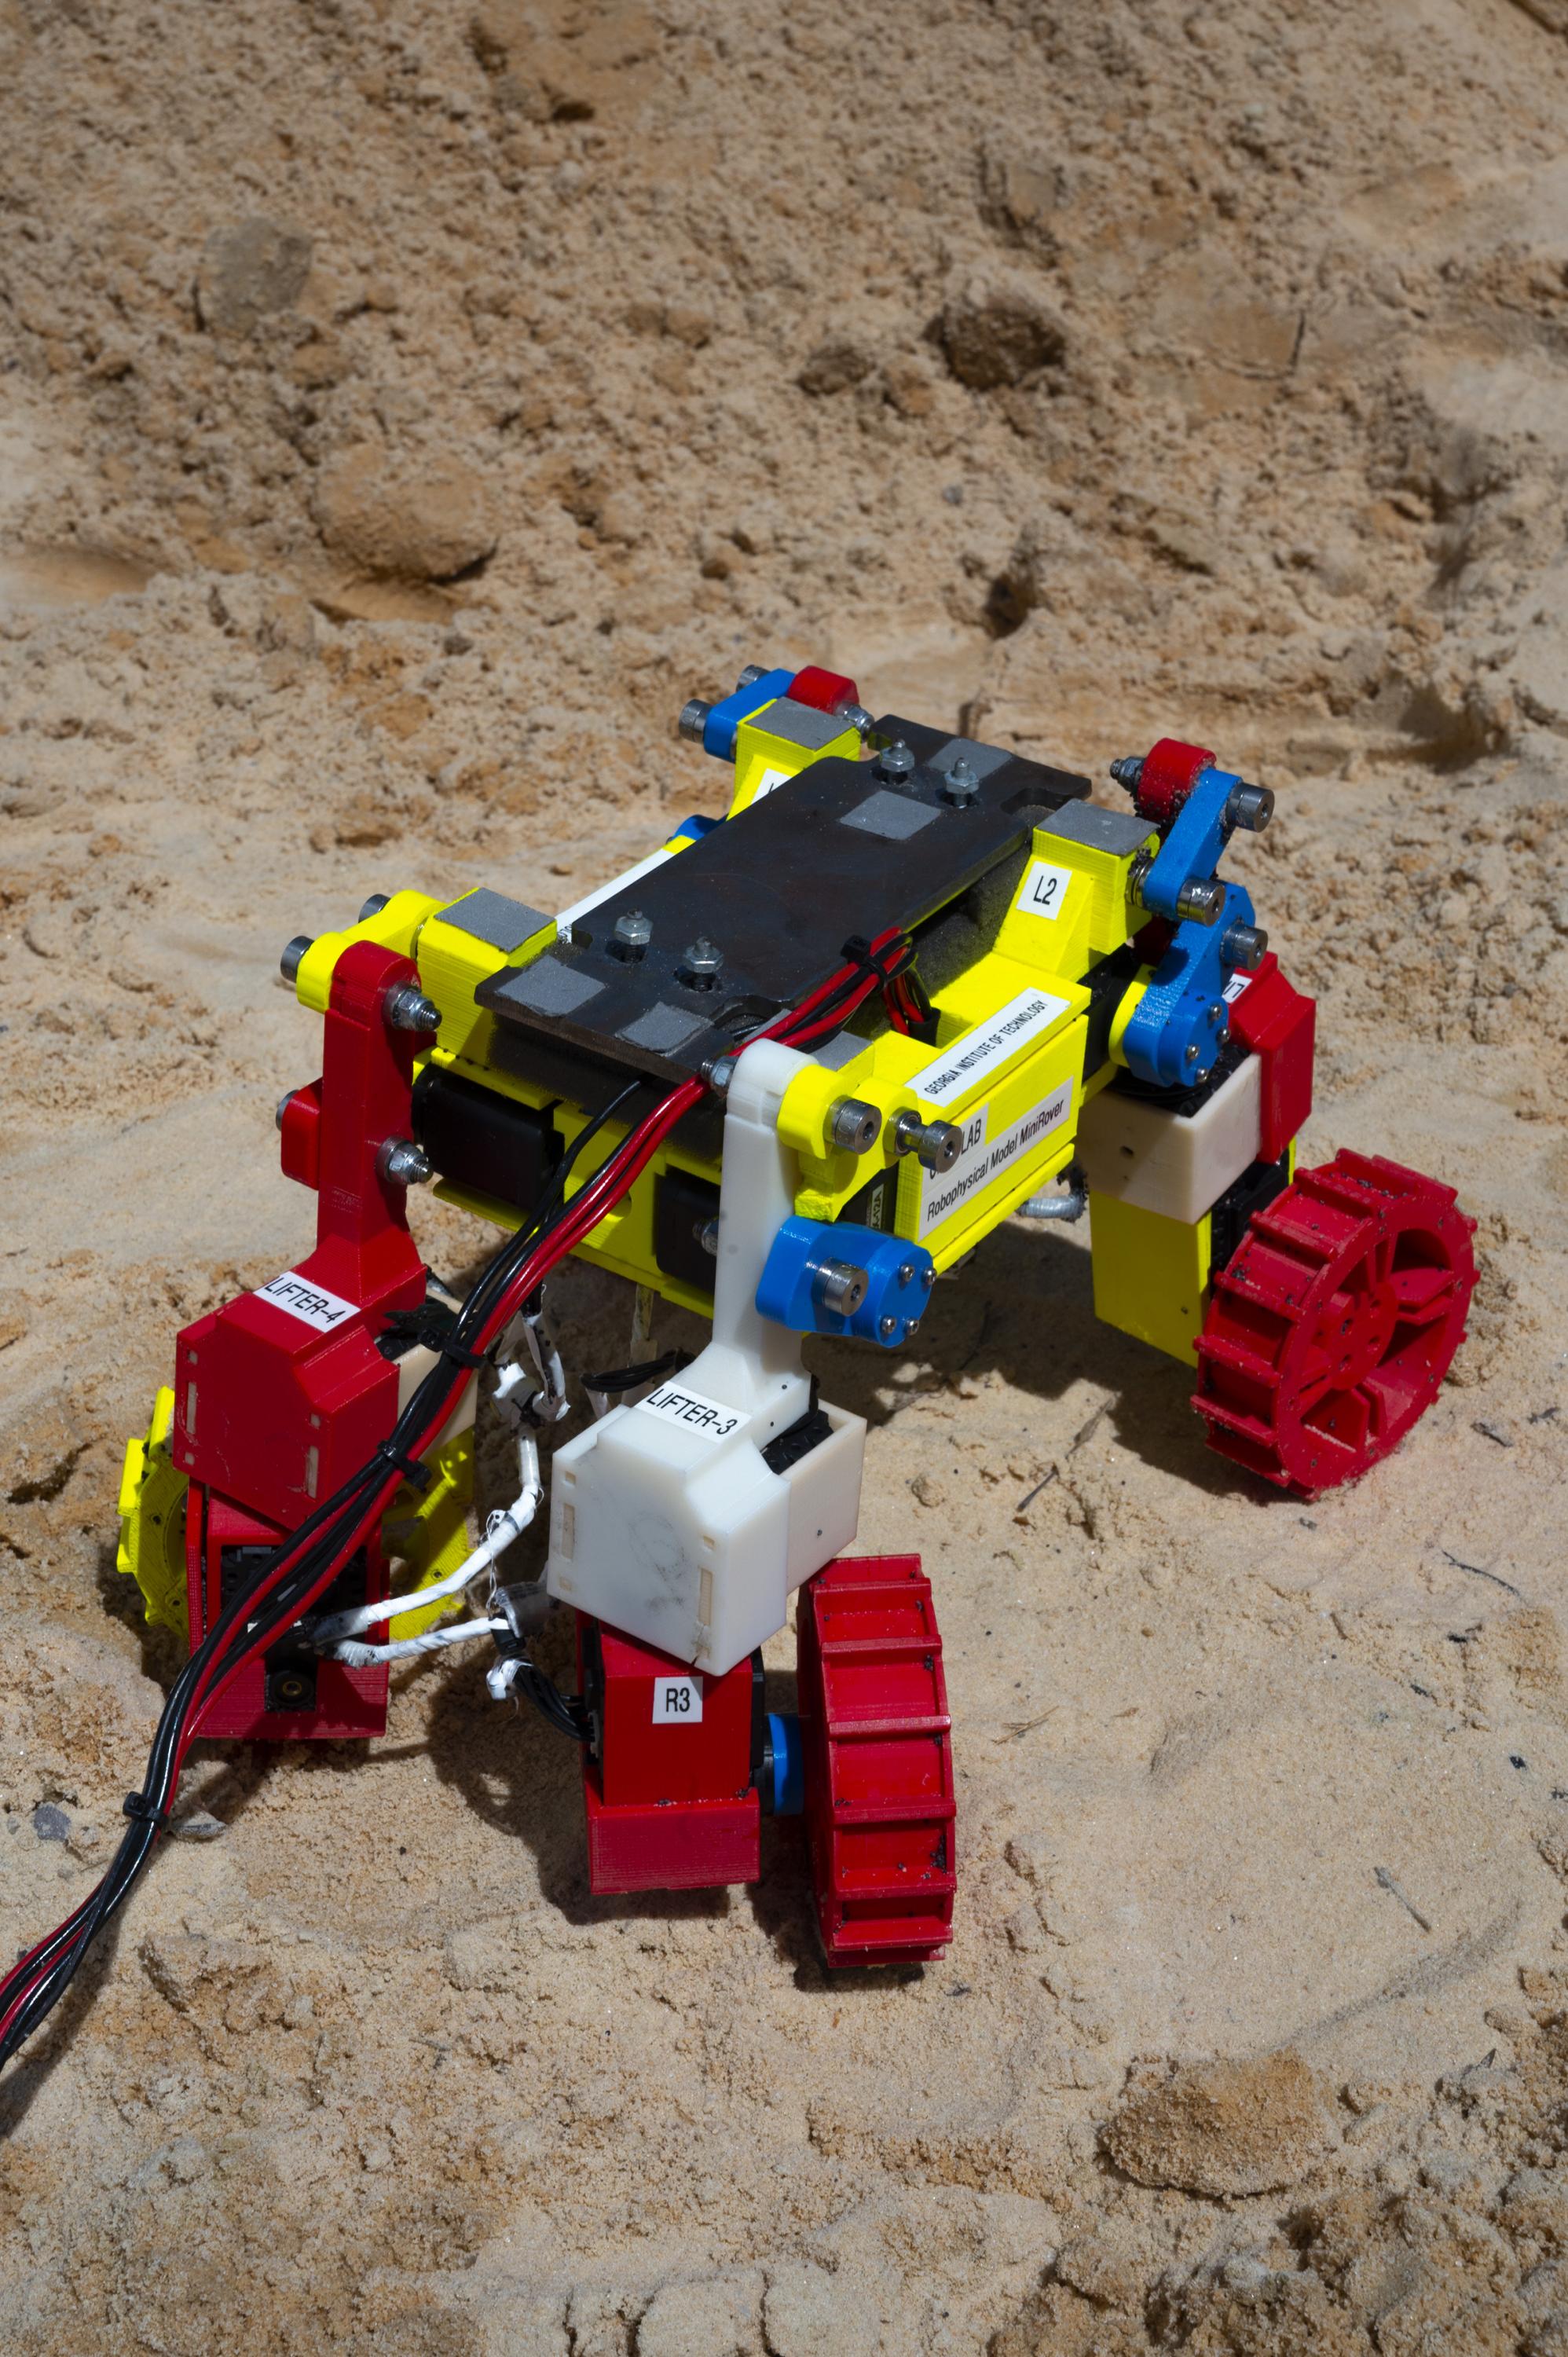 Built with multifunctional appendages able to spin wheels that can also be wiggled and lifted, the Mini Rover was modeled on a novel NASA rover design and used in the laboratory to develop and test complex locomotion techniques robust enough to help it climb hills composed of granular material, here ordinary beach sand. (Credit: Christopher Moore, Georgia Tech)